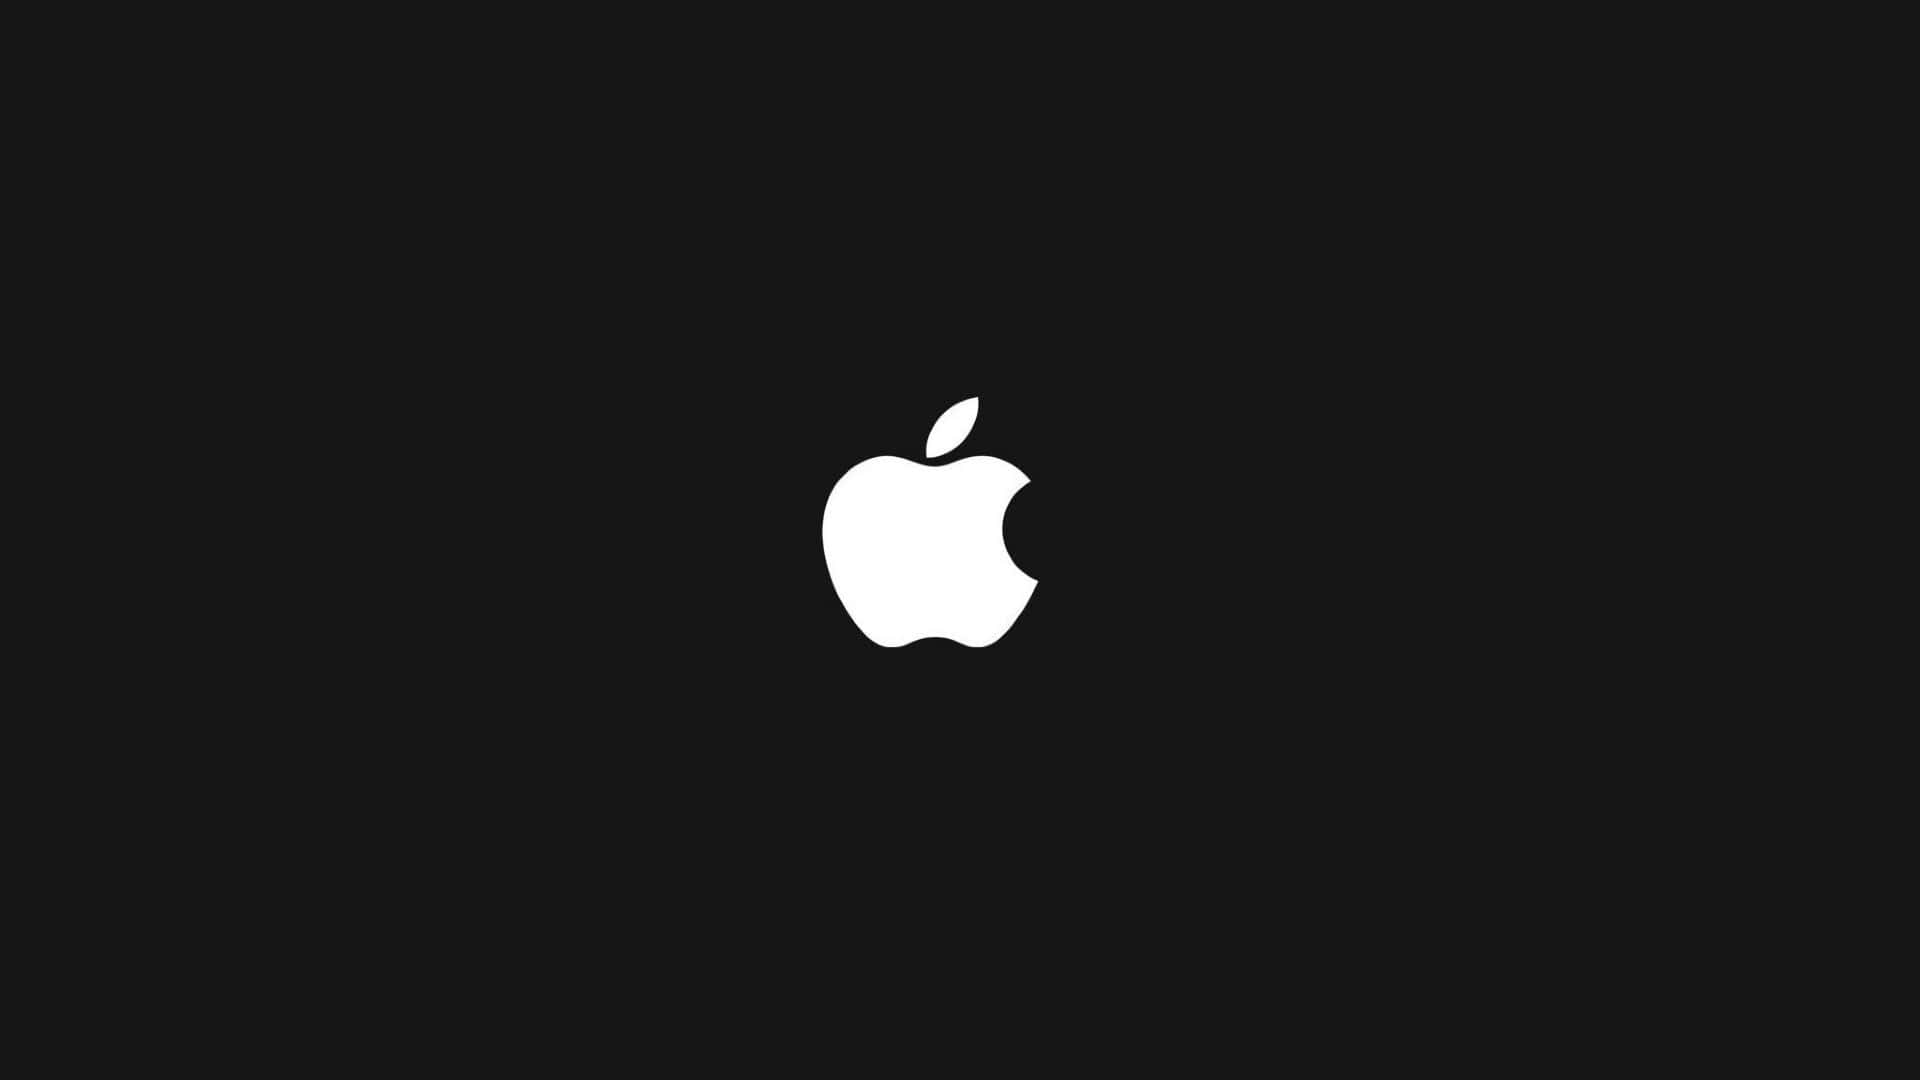 The Stylish Black MacBook – The Future in Technology Wallpaper